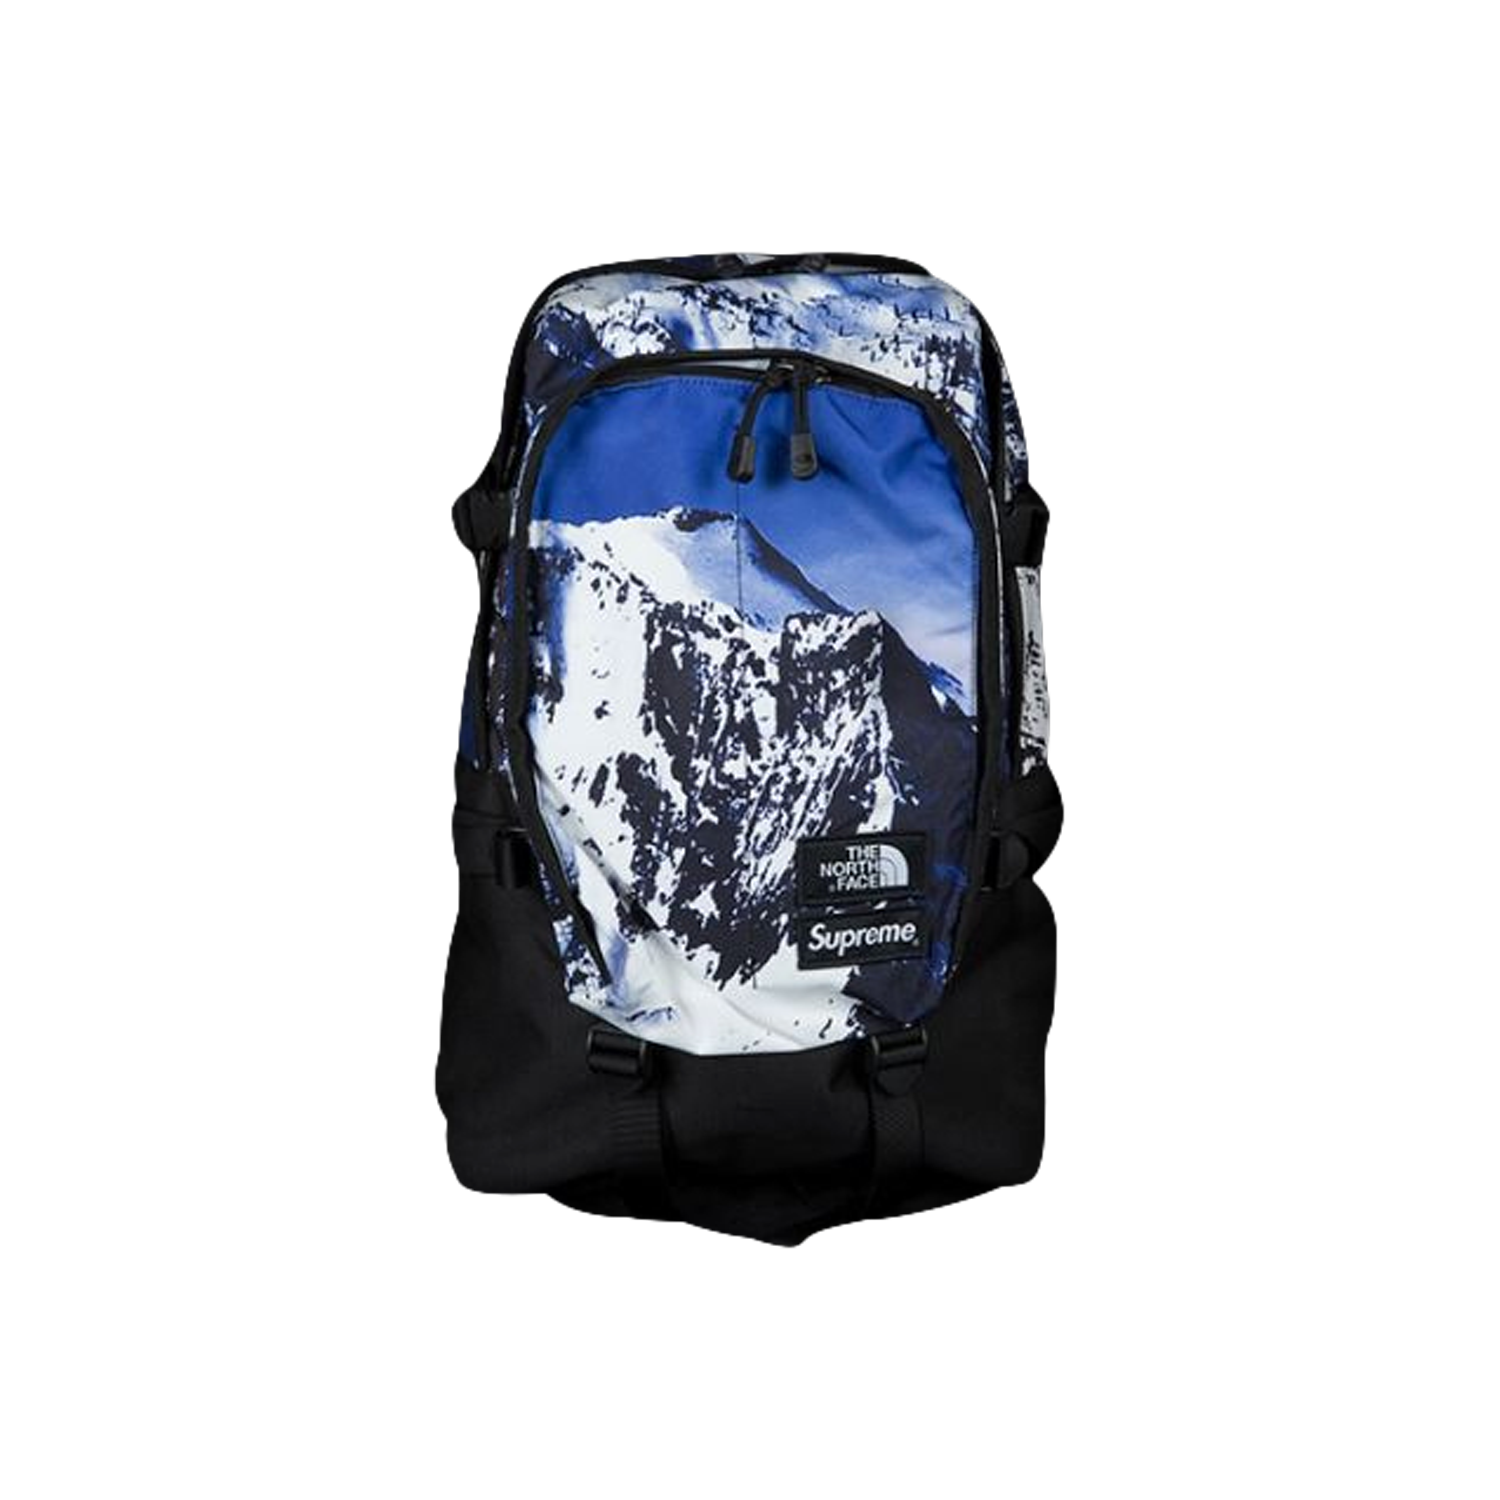 Supreme x The North Face Mountain Expedition Backpack 'Mountain'